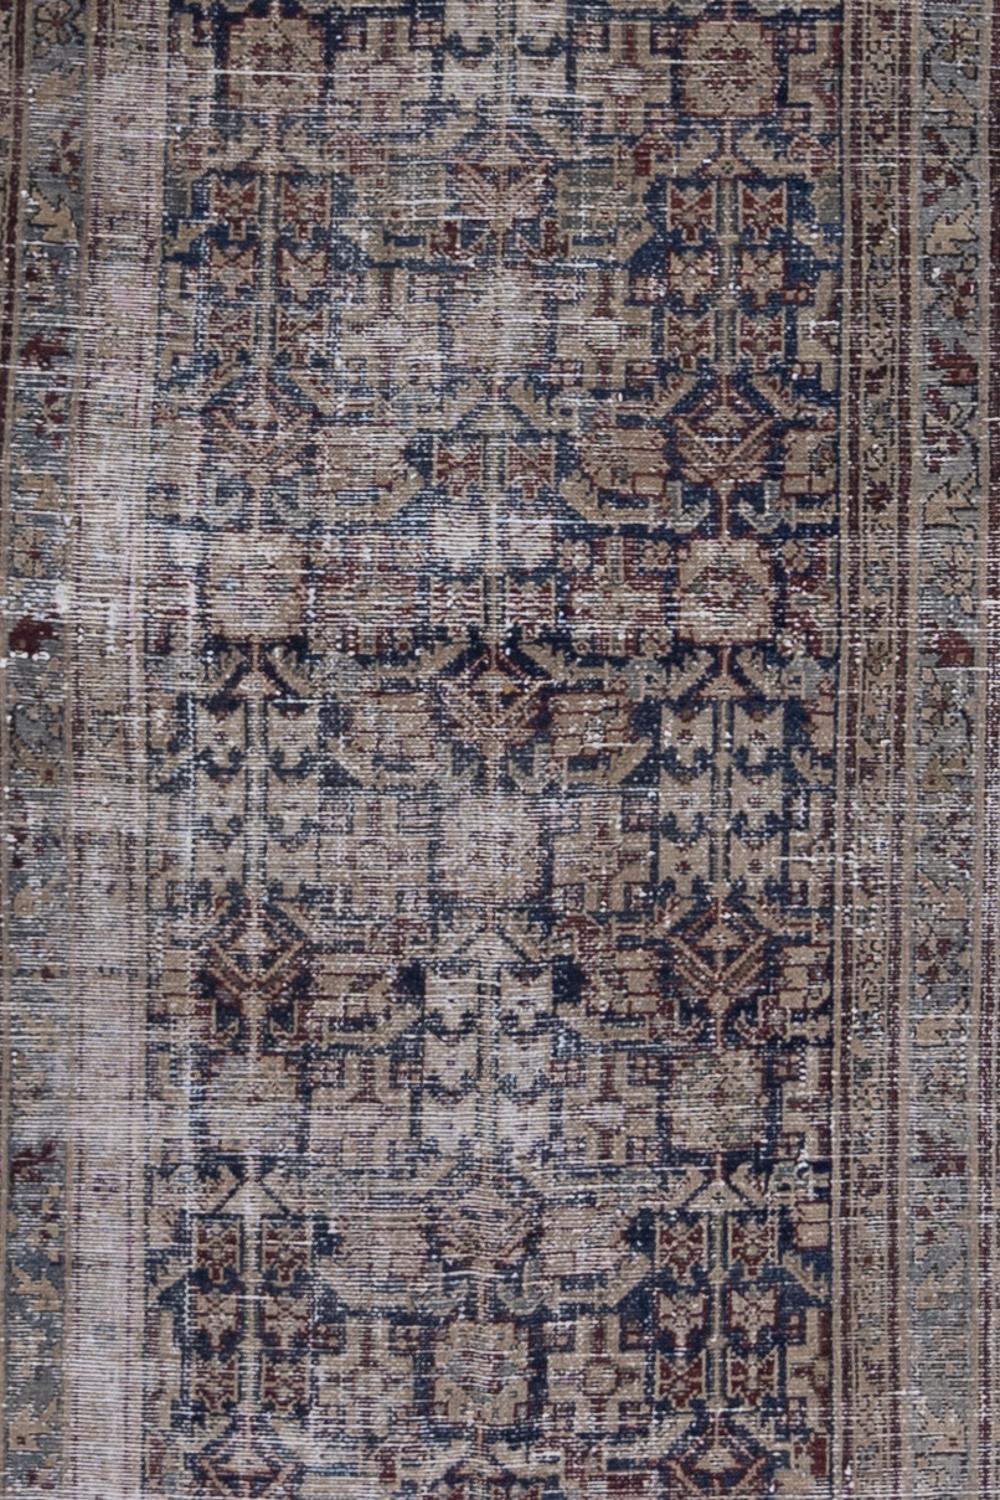 Age: early 20th century

Colors: light gray, stone, midnight blue, mushroom, brown, oxblood, baby blue

Pile: low

Wear Notes: 7

Material: wool on cotton

Moody and deep, this midnight blue runner has an alluring and mysterious quality to